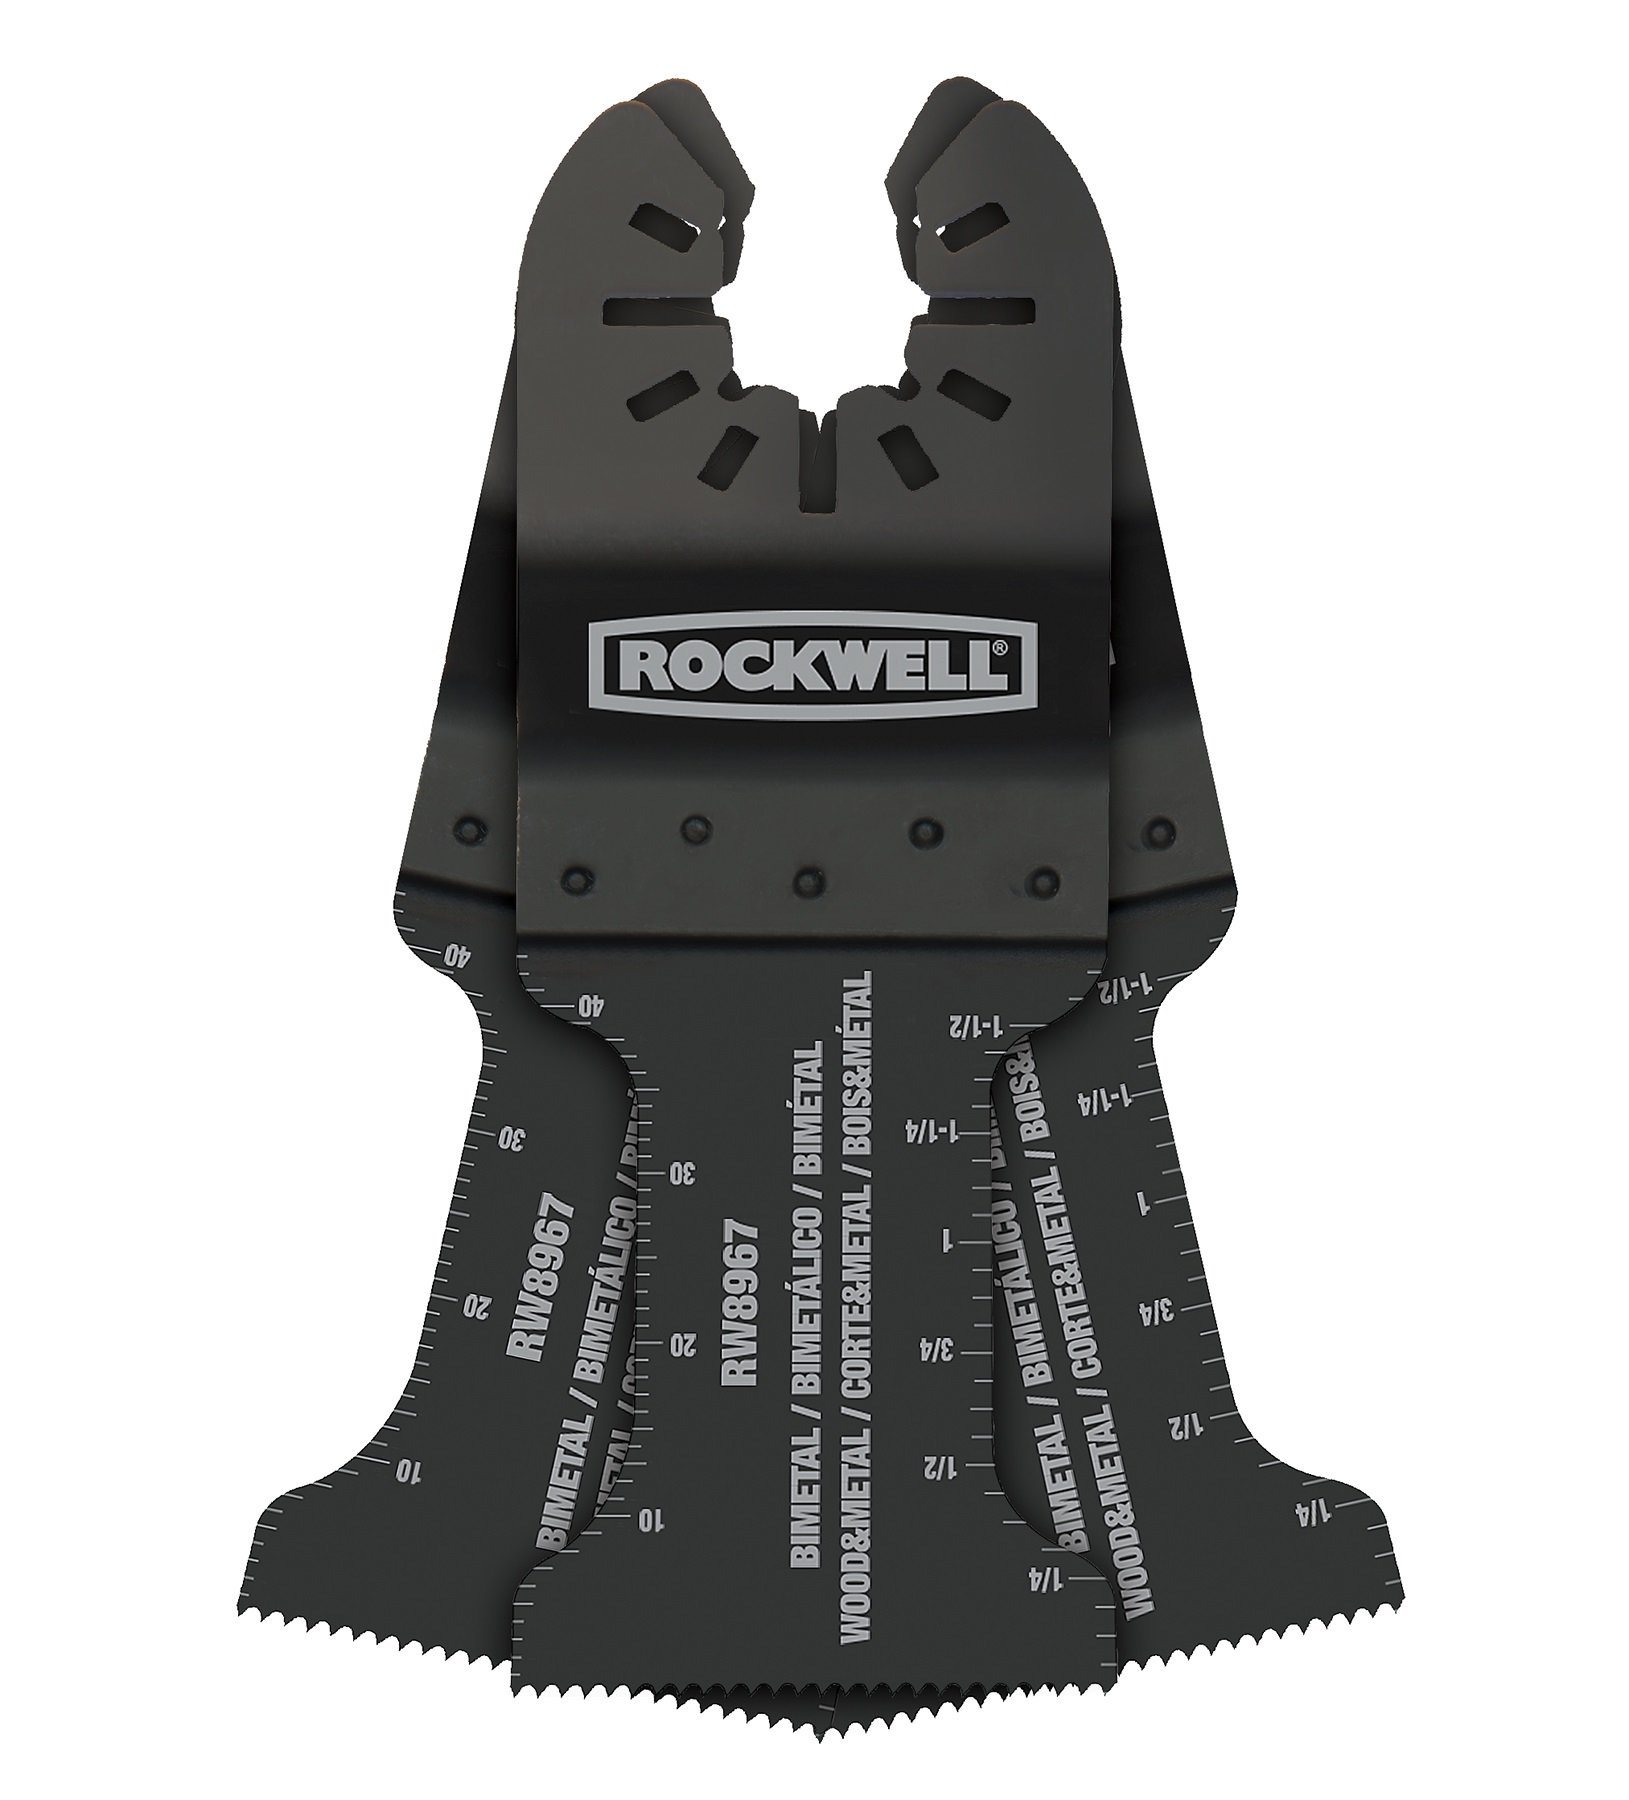 Rockwell Sonicrafter Oscillating Multitool Extended Life Bimetal Wood & Nail End Cut Blade (3-PK), 1-3/8 Inch # RW8967.3